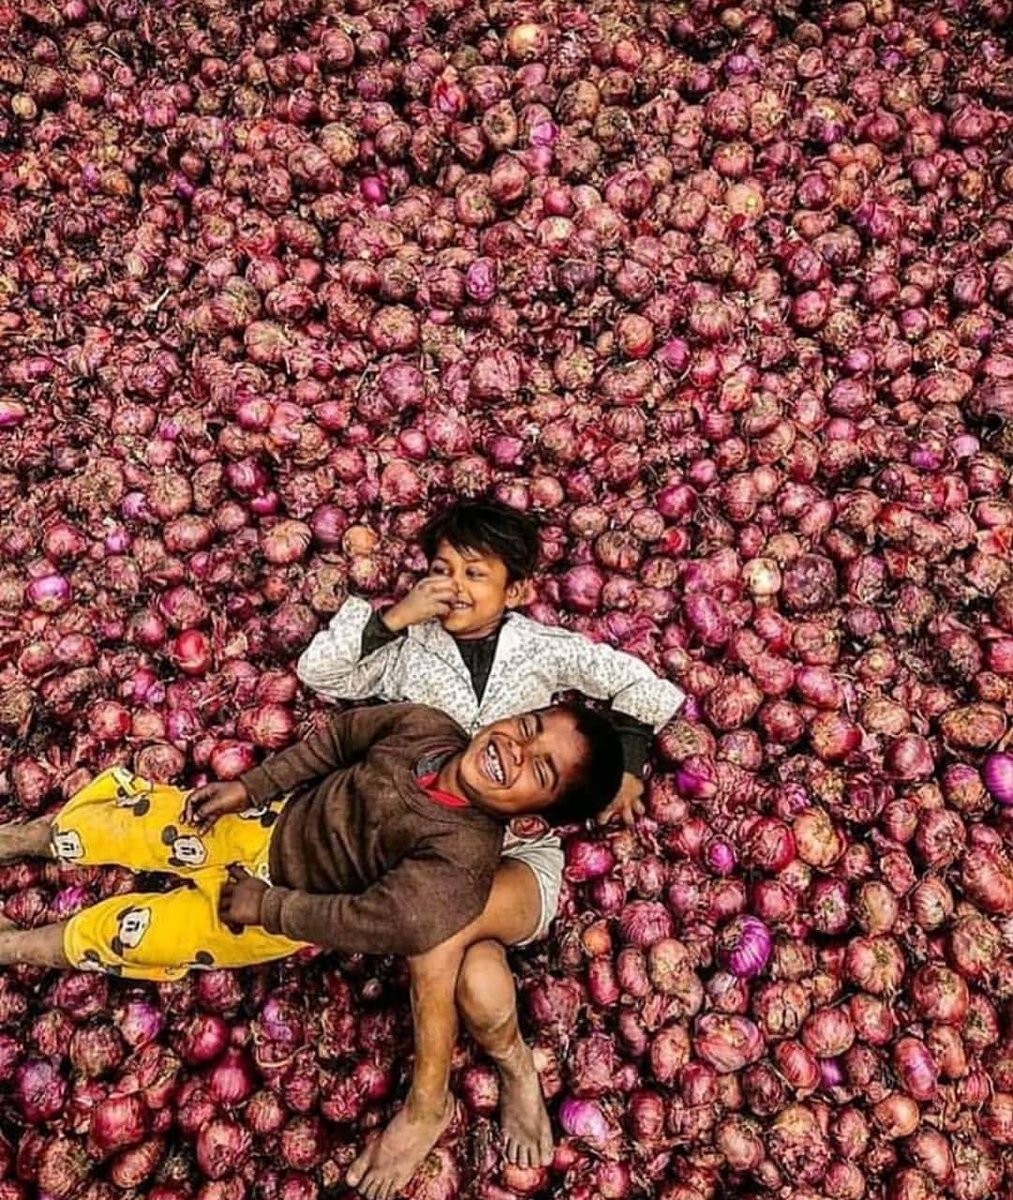 Not a meme
Just a picture of millionaires kid😂😂

#onionpriceinindia #MEMES